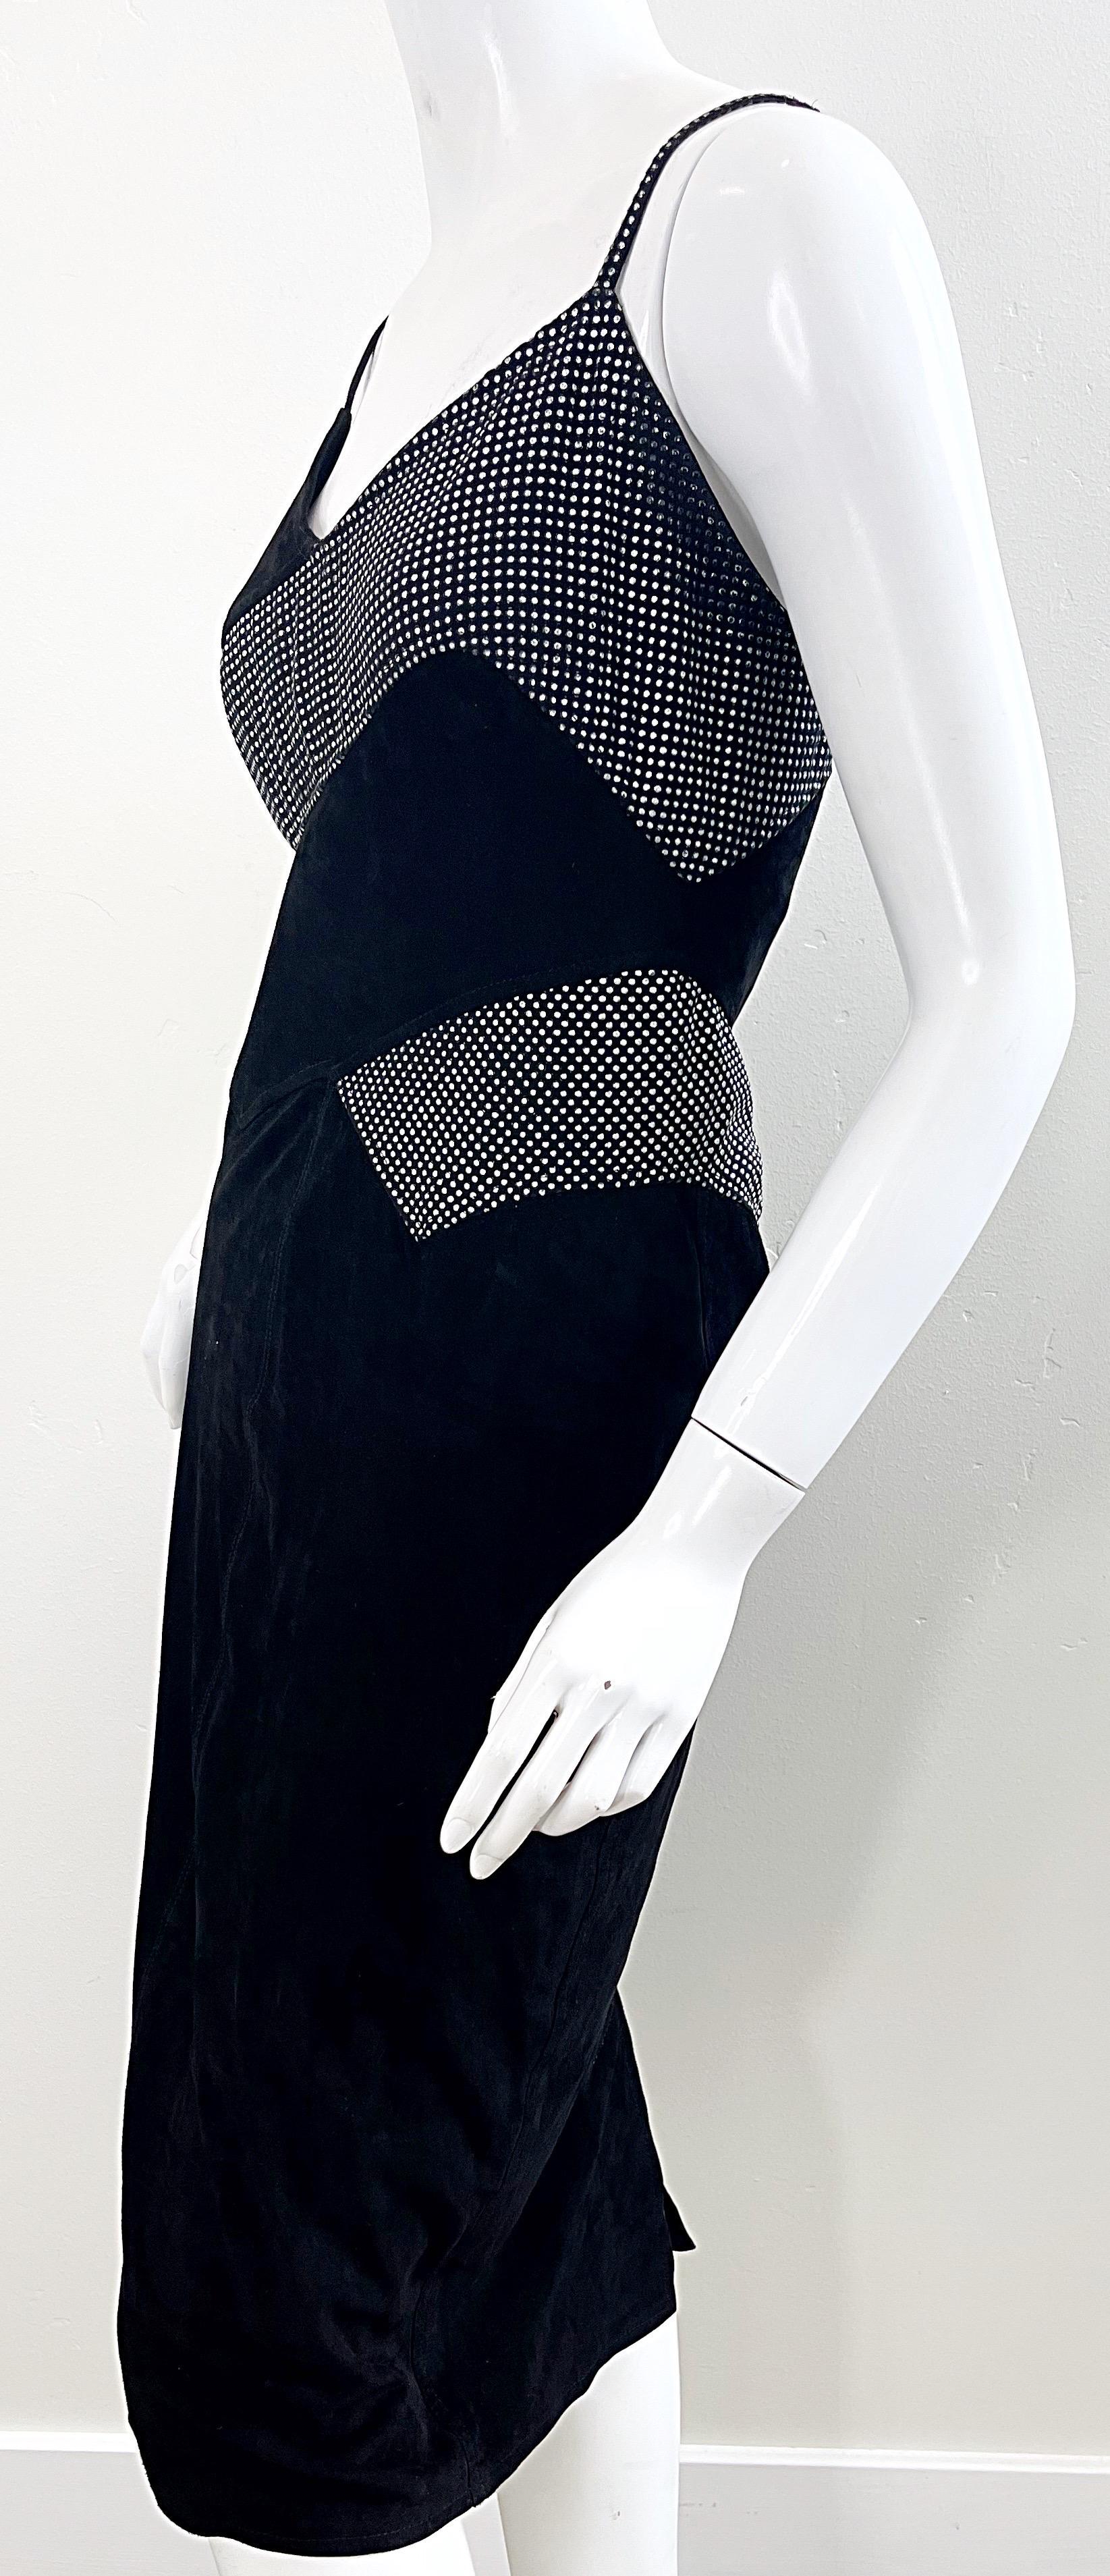 Fendi 1980s Fendissime Black Silver Suede Leather Vintage 80s Hand Painted Dress For Sale 8